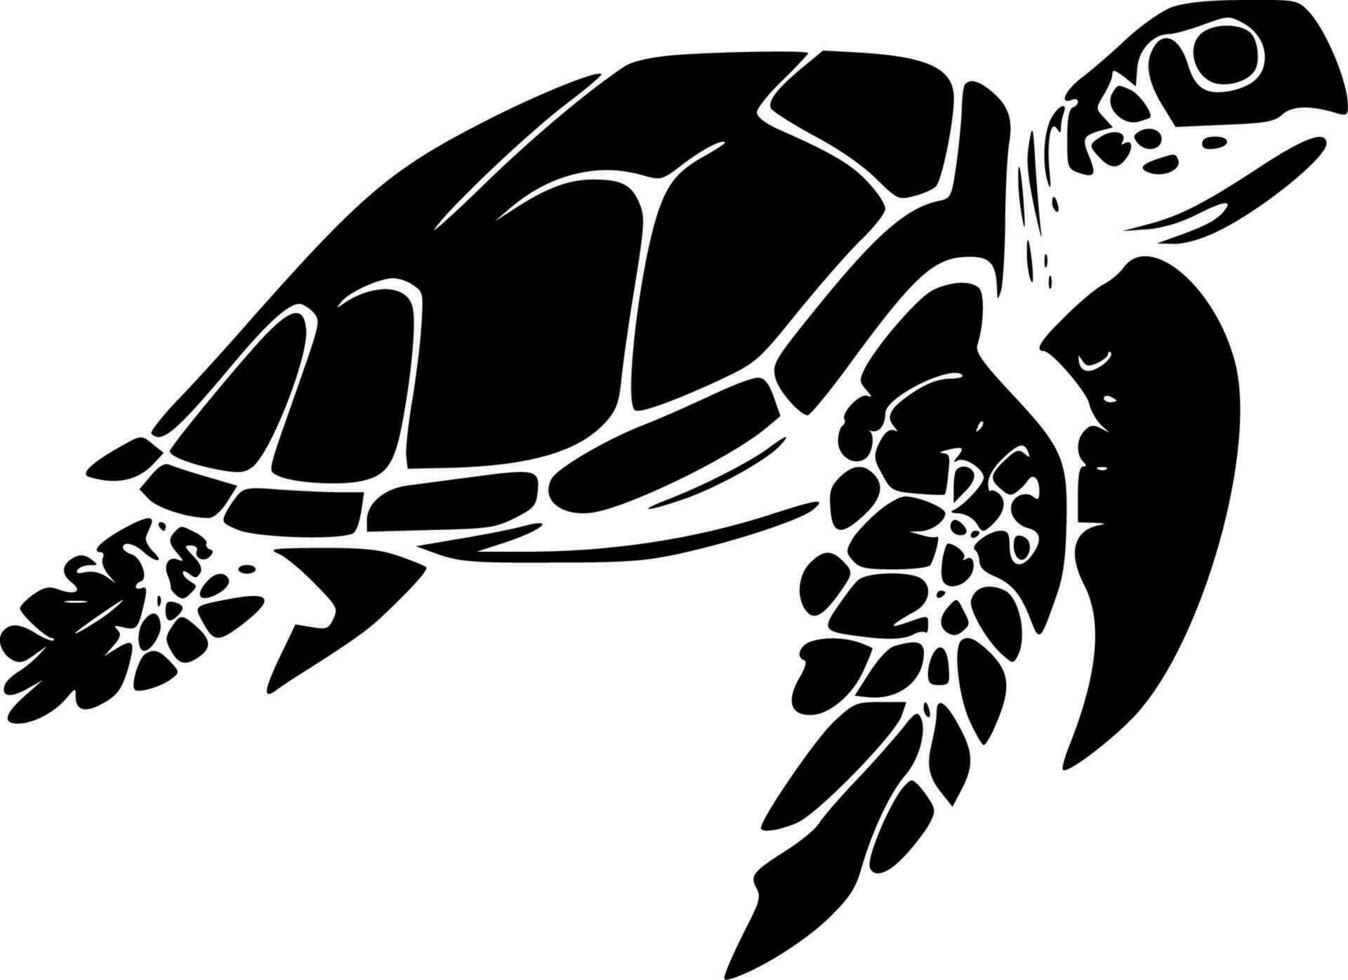 Sea Turtle - Black and White Isolated Icon - Vector illustration